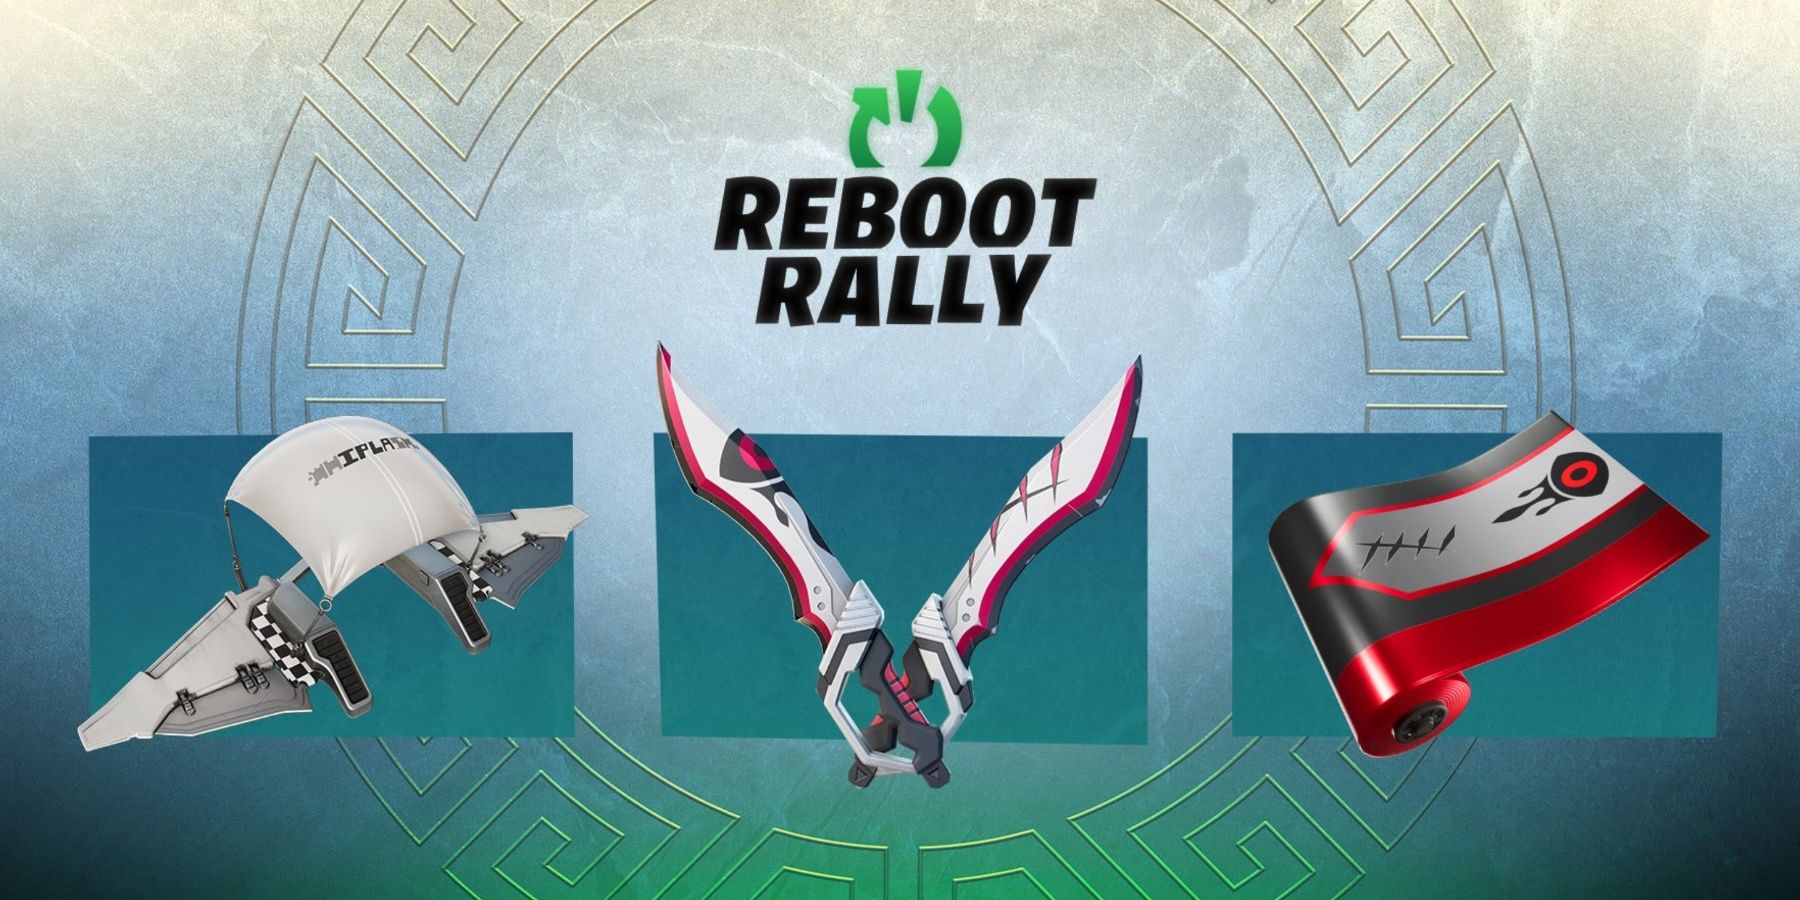 reboot rally event and its rewards